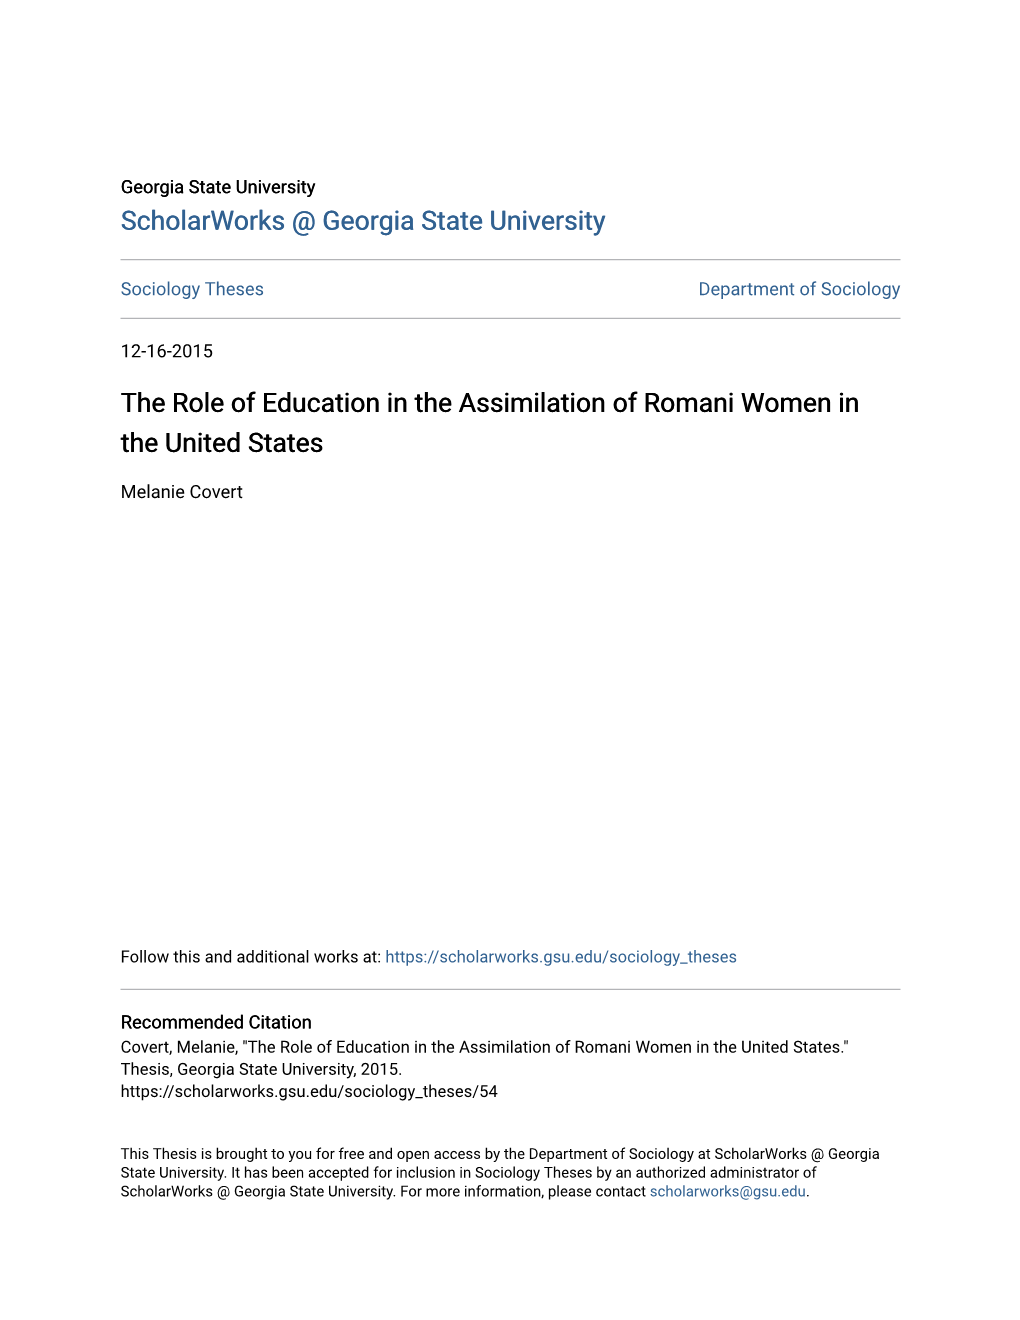 The Role of Education in the Assimilation of Romani Women in the United States